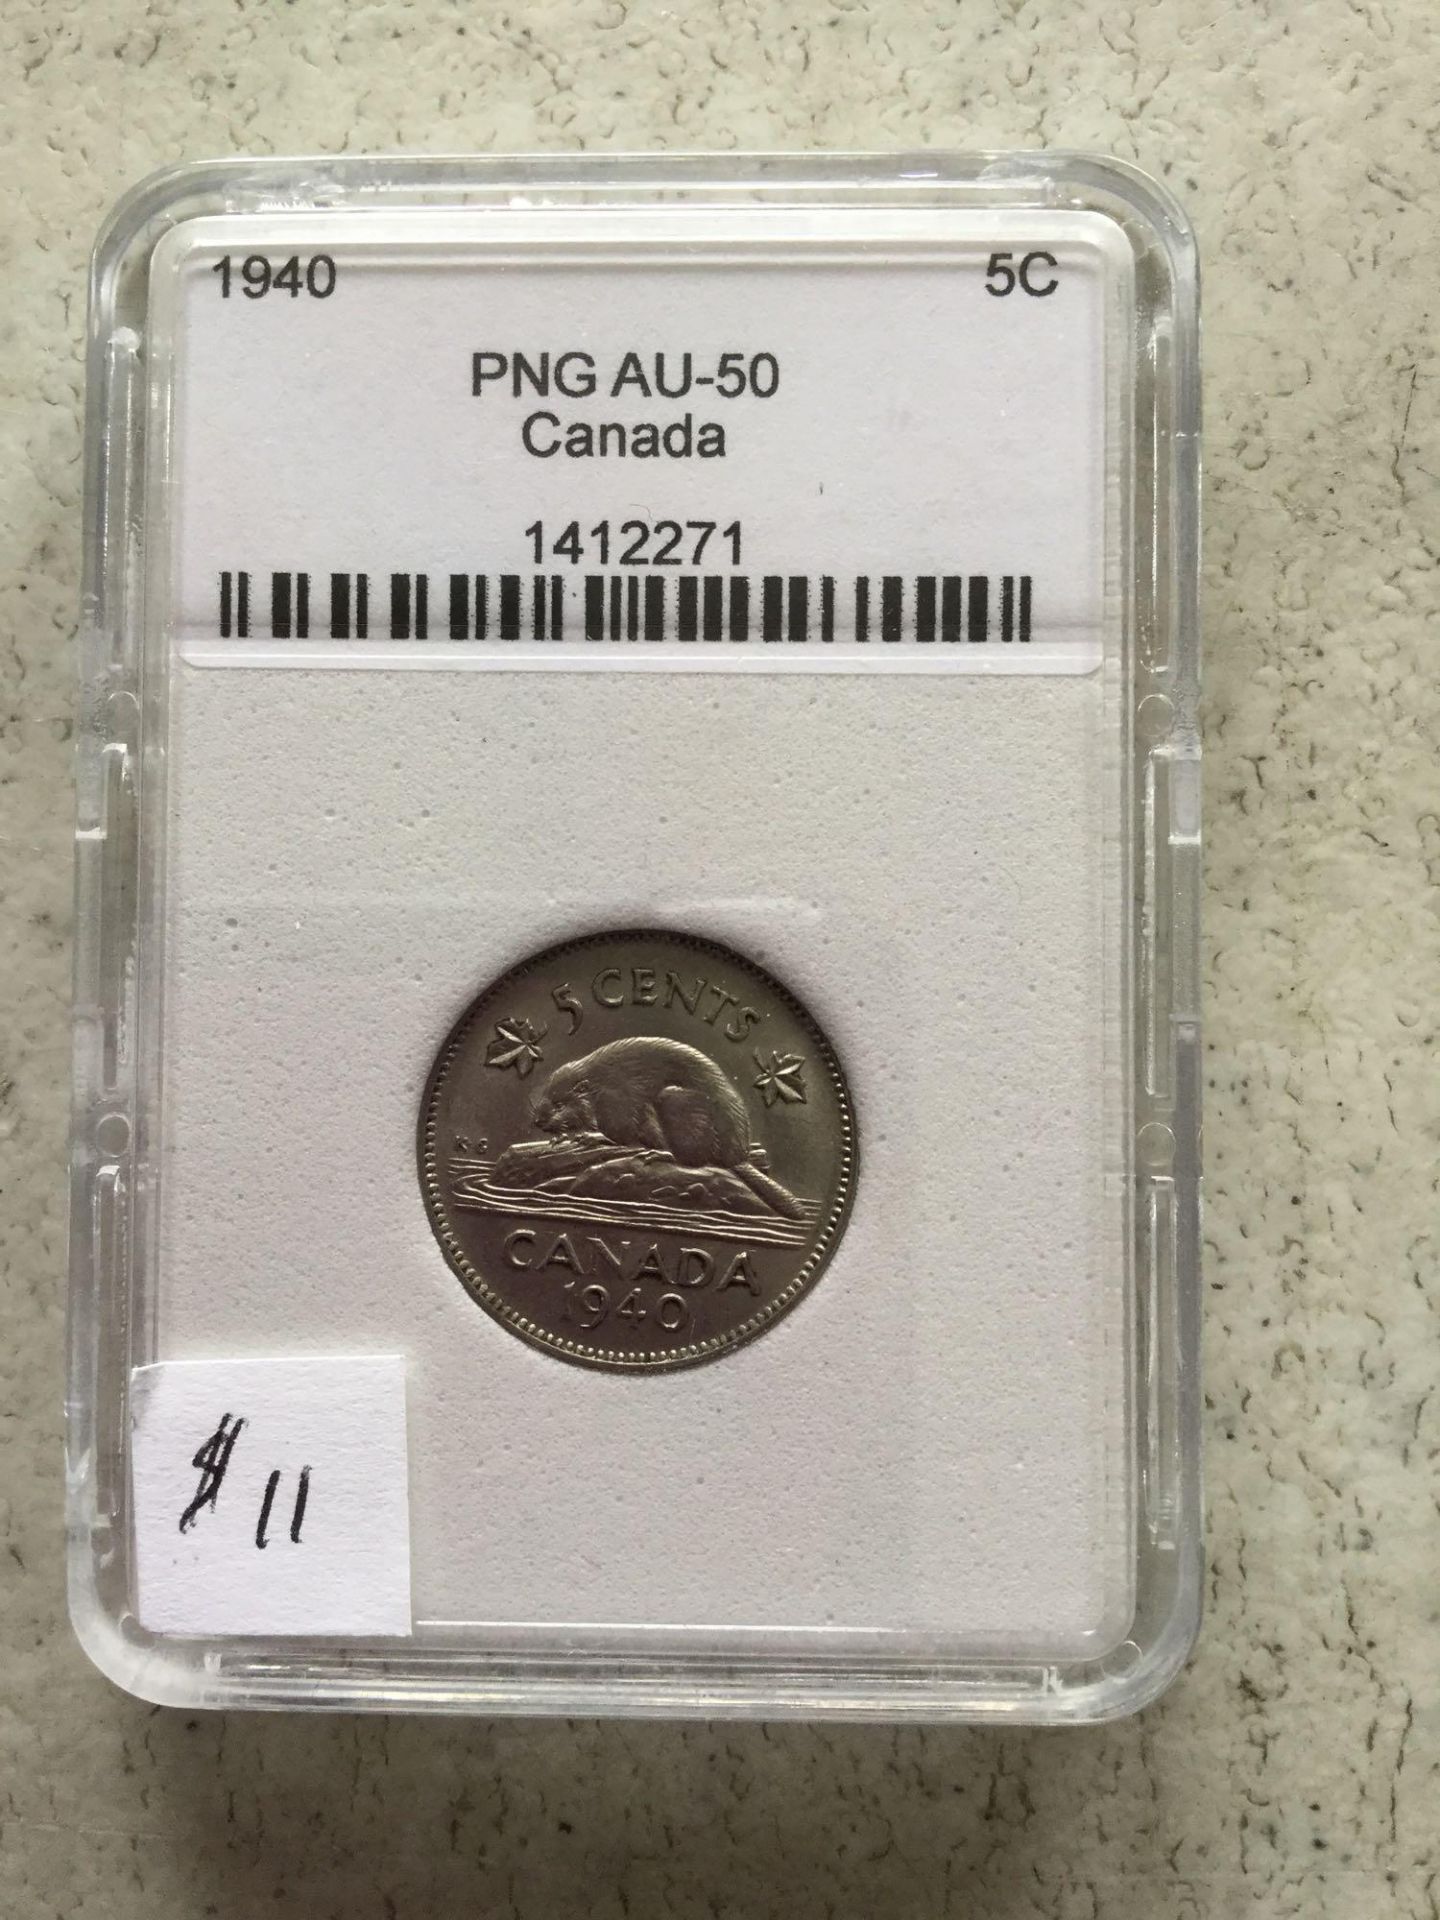 1940- Royal Canadian Mint 5 Cent coin - PNG AU-50 CANADA